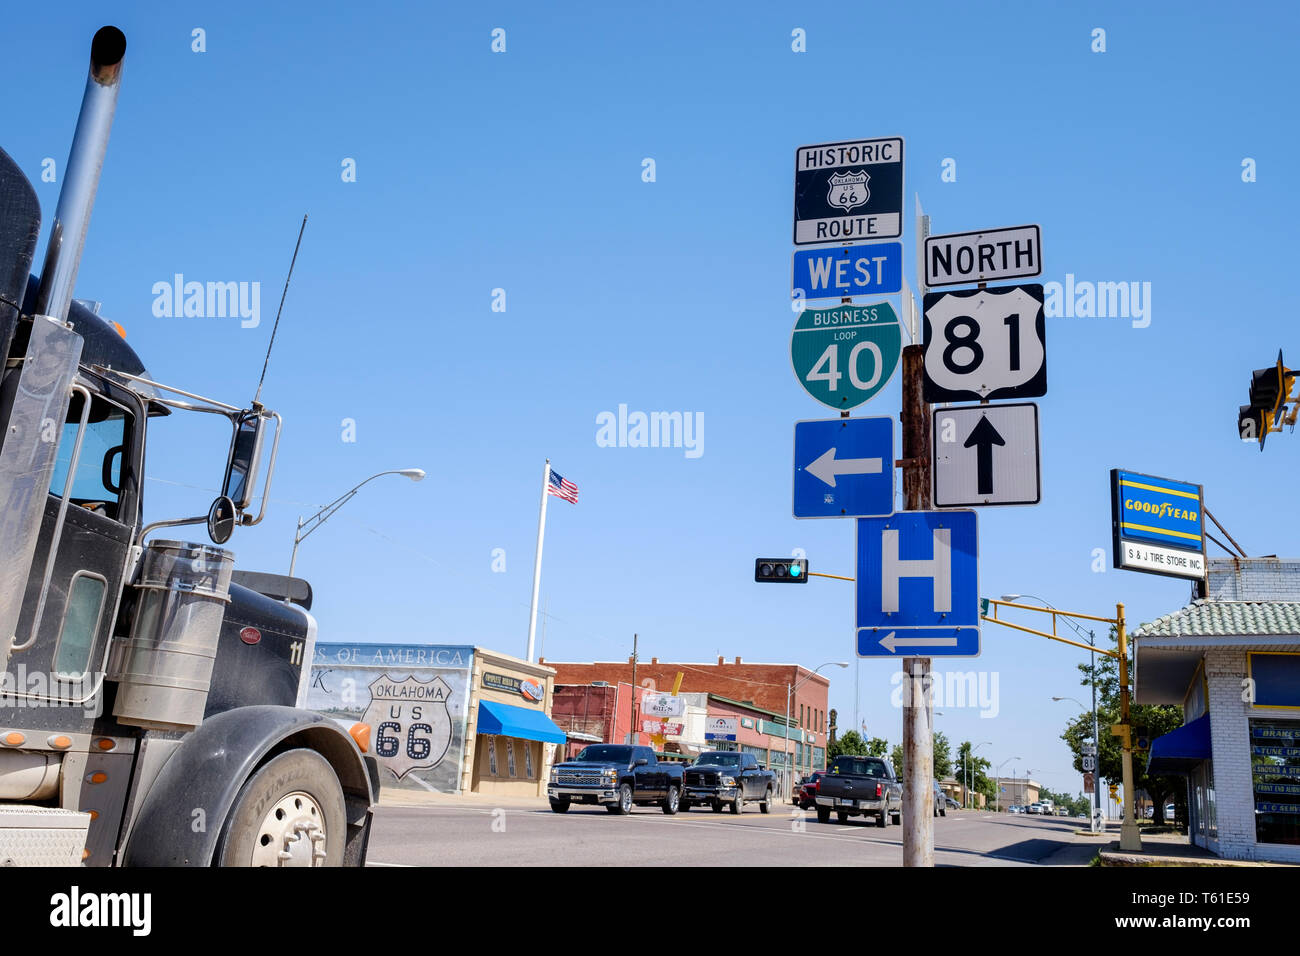 Historic U.S. Route 66 traffic sign among others in Oklahoma, USA Stock  Photo - Alamy